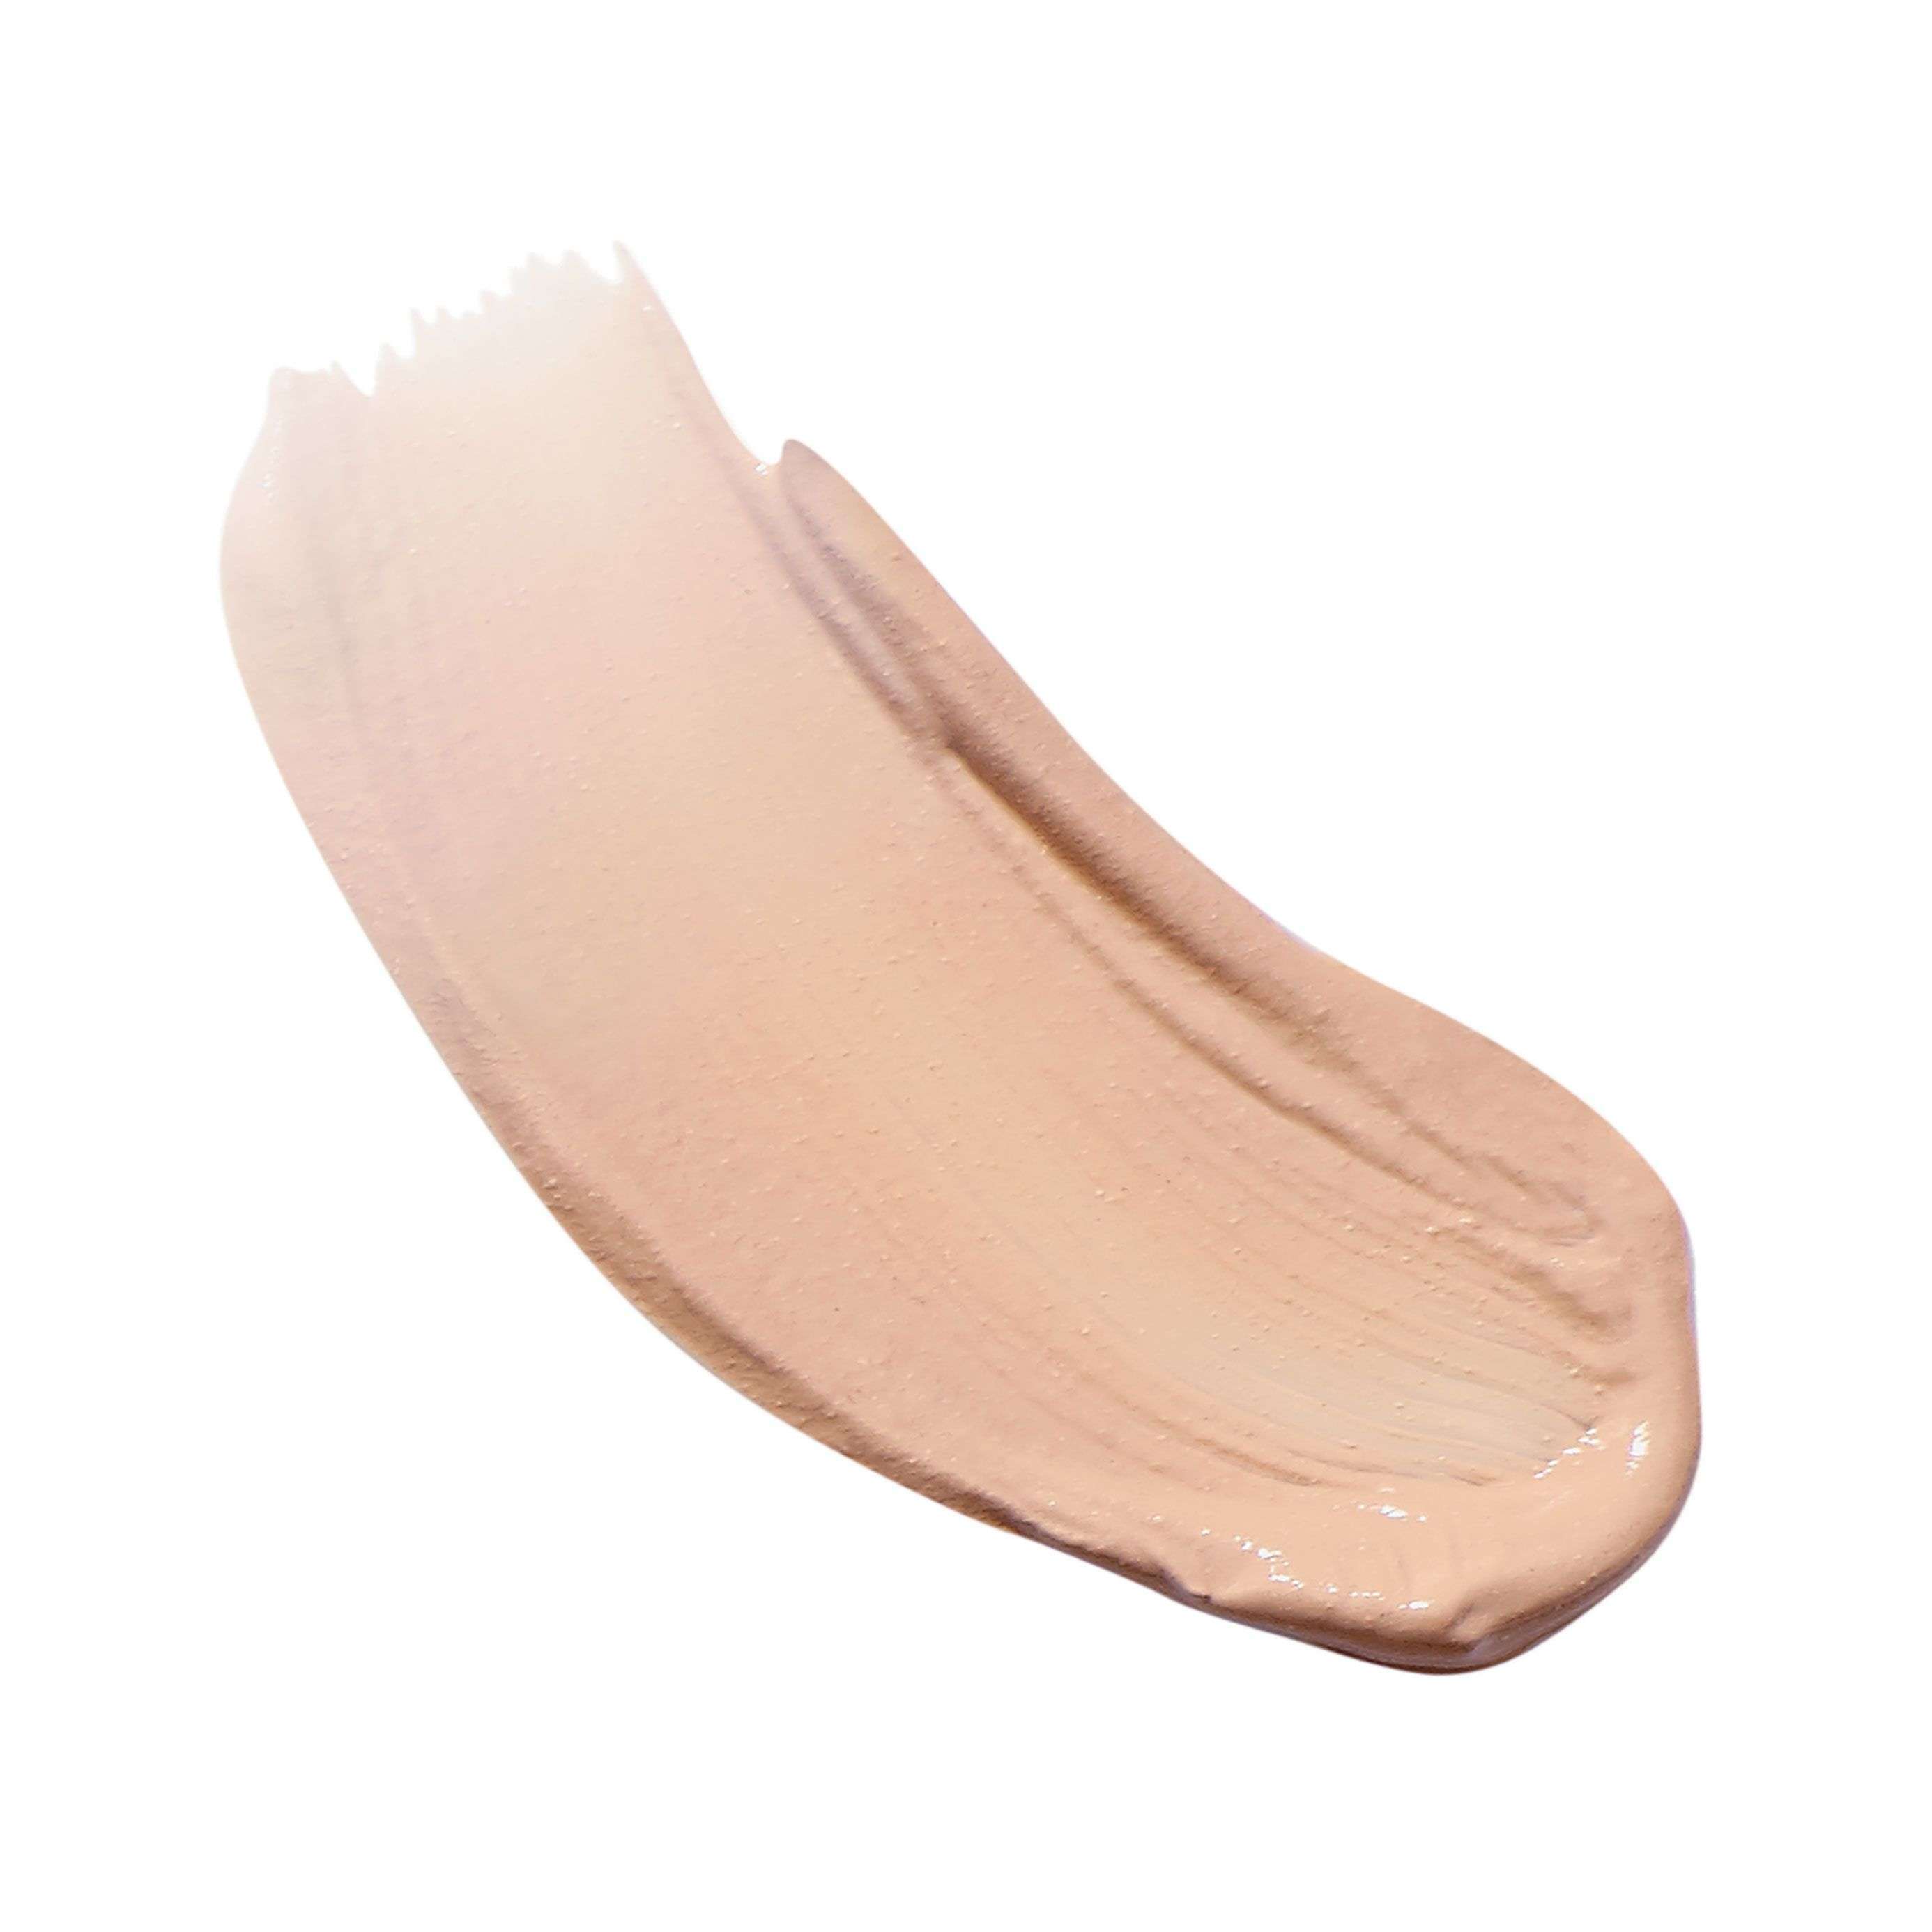 Jane Iredale Active Light® Under-eye Concealer at Socialite Beauty Canada